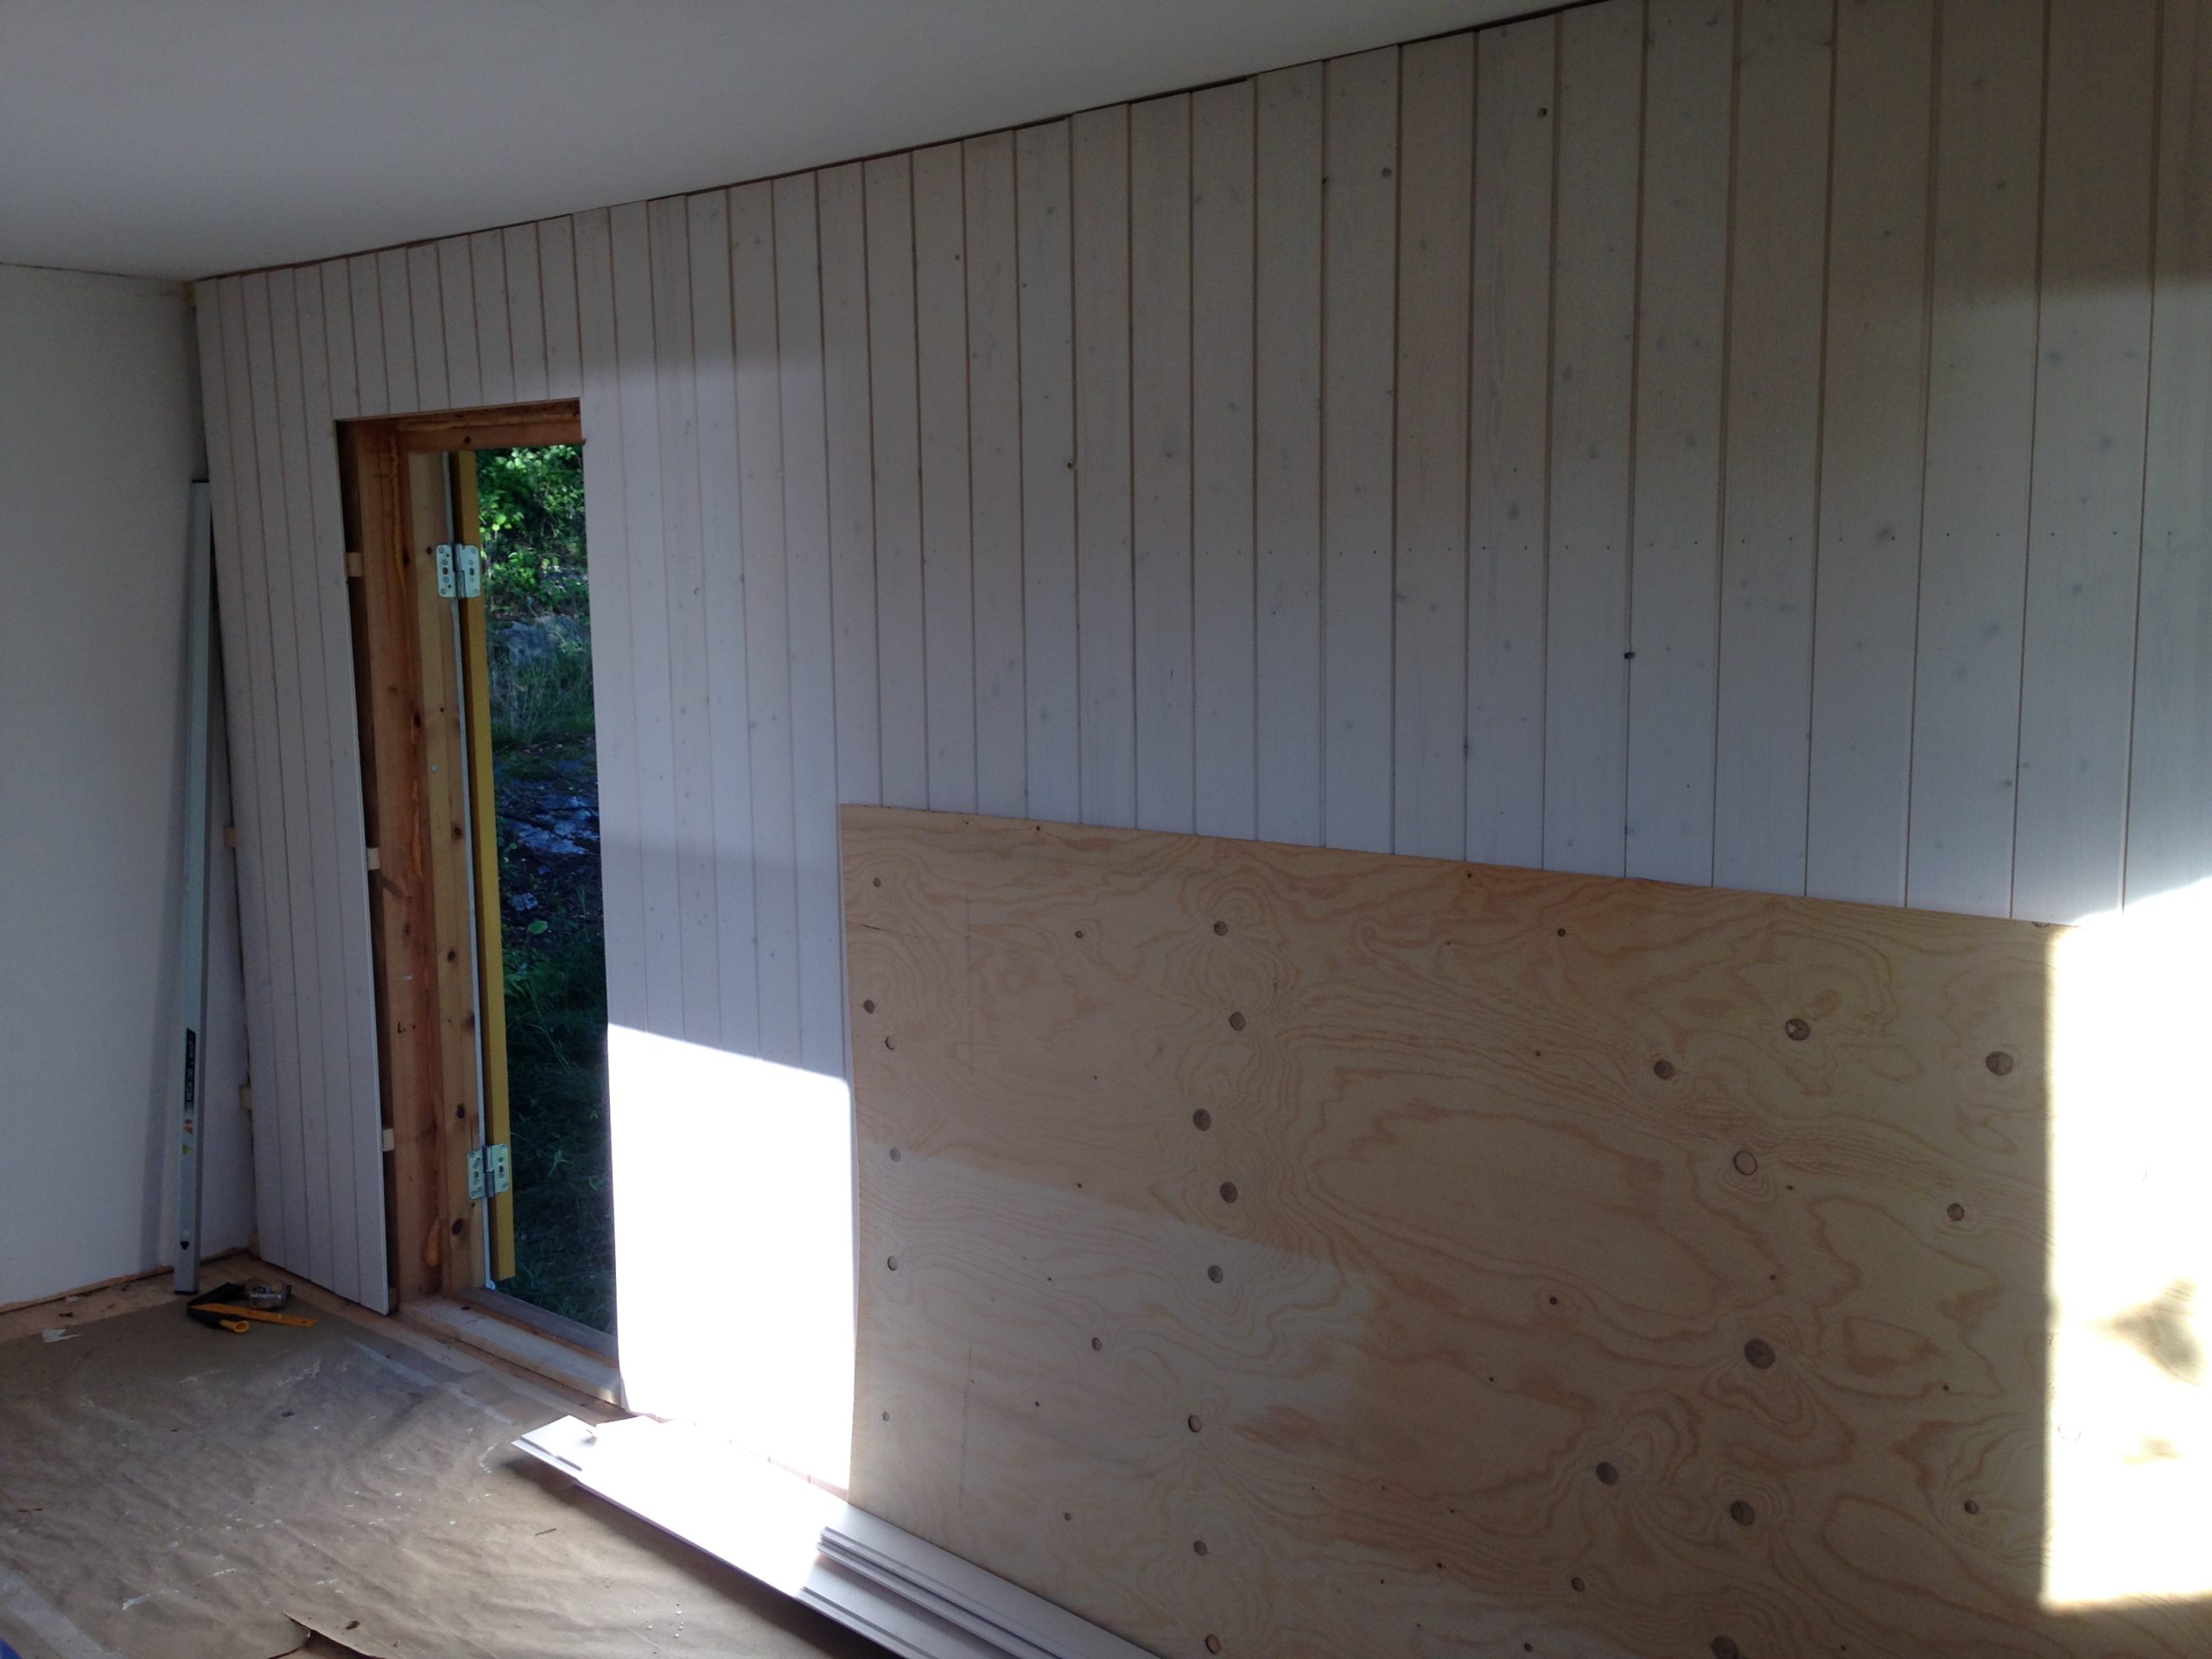 4 Steps for Installing the Siding of a Wooden House